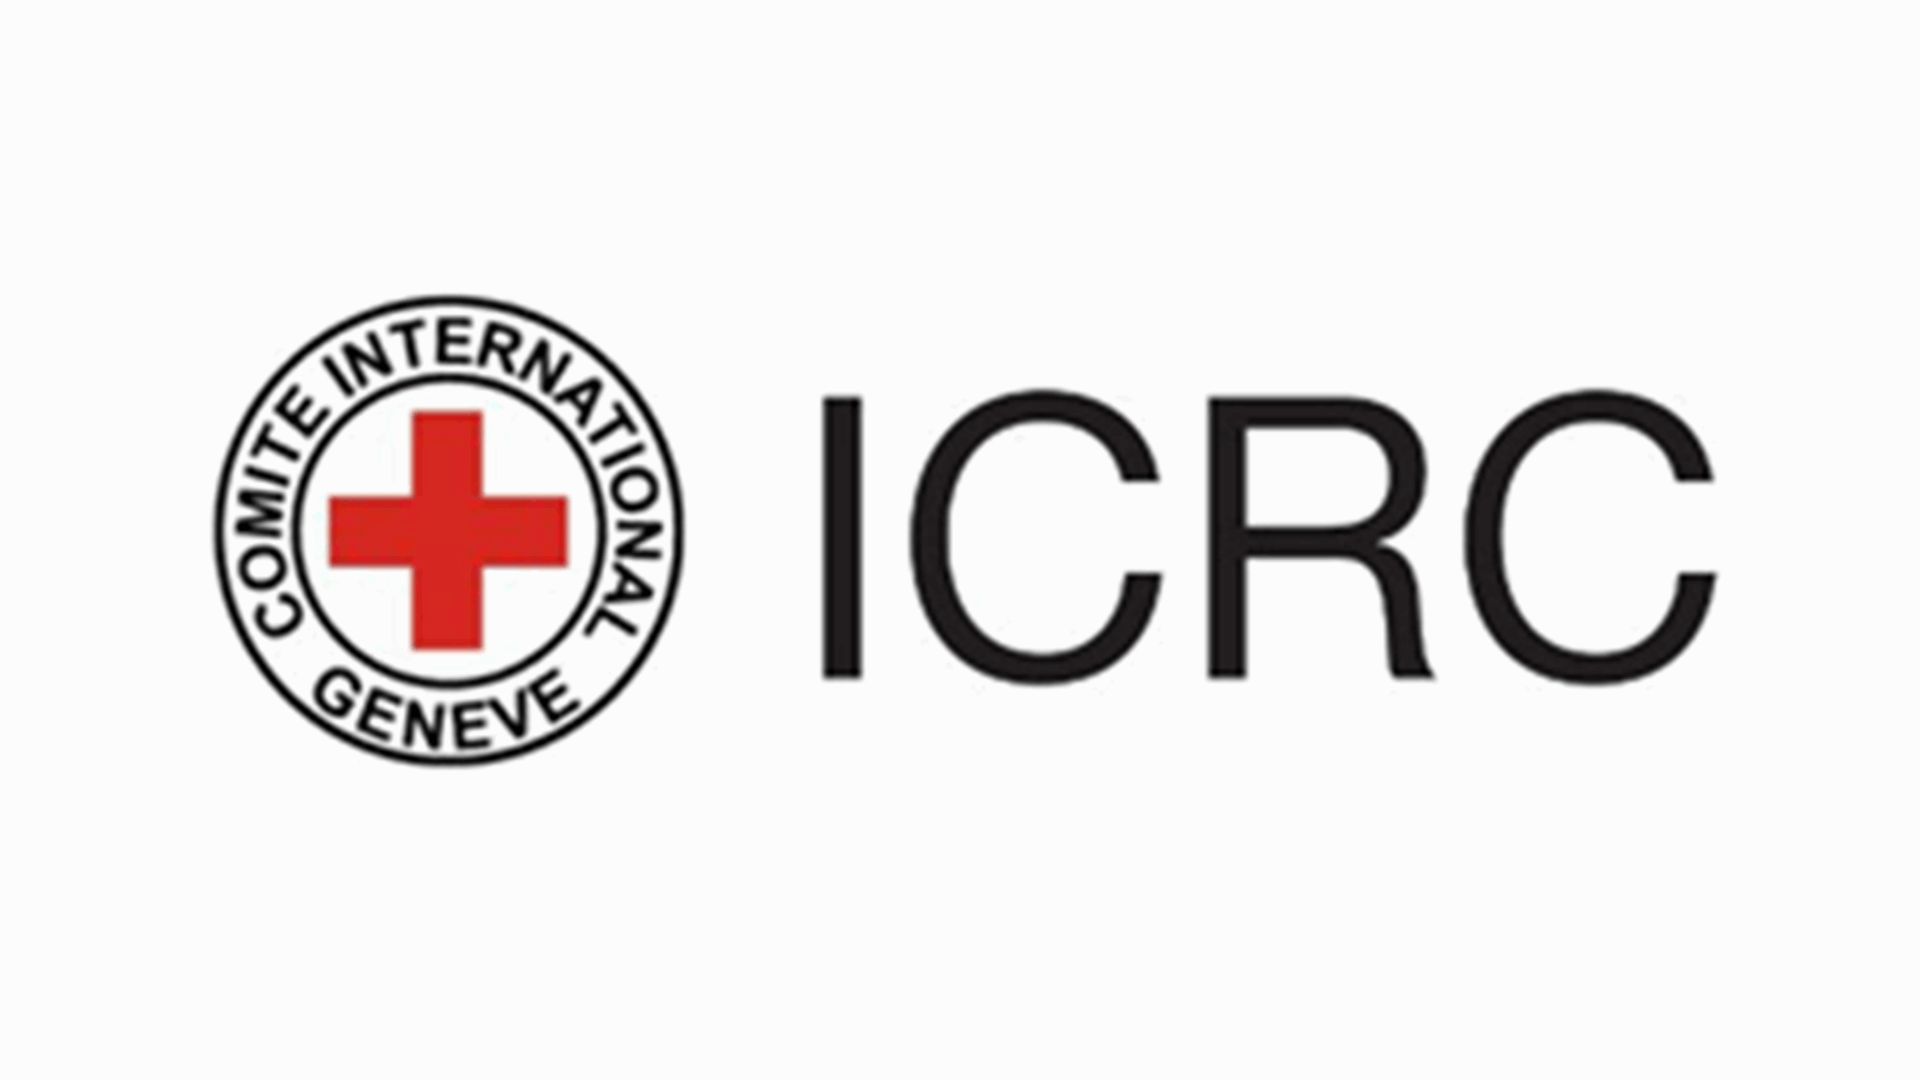 Red Cross appeals for information on three staff missing in Syria since 2013